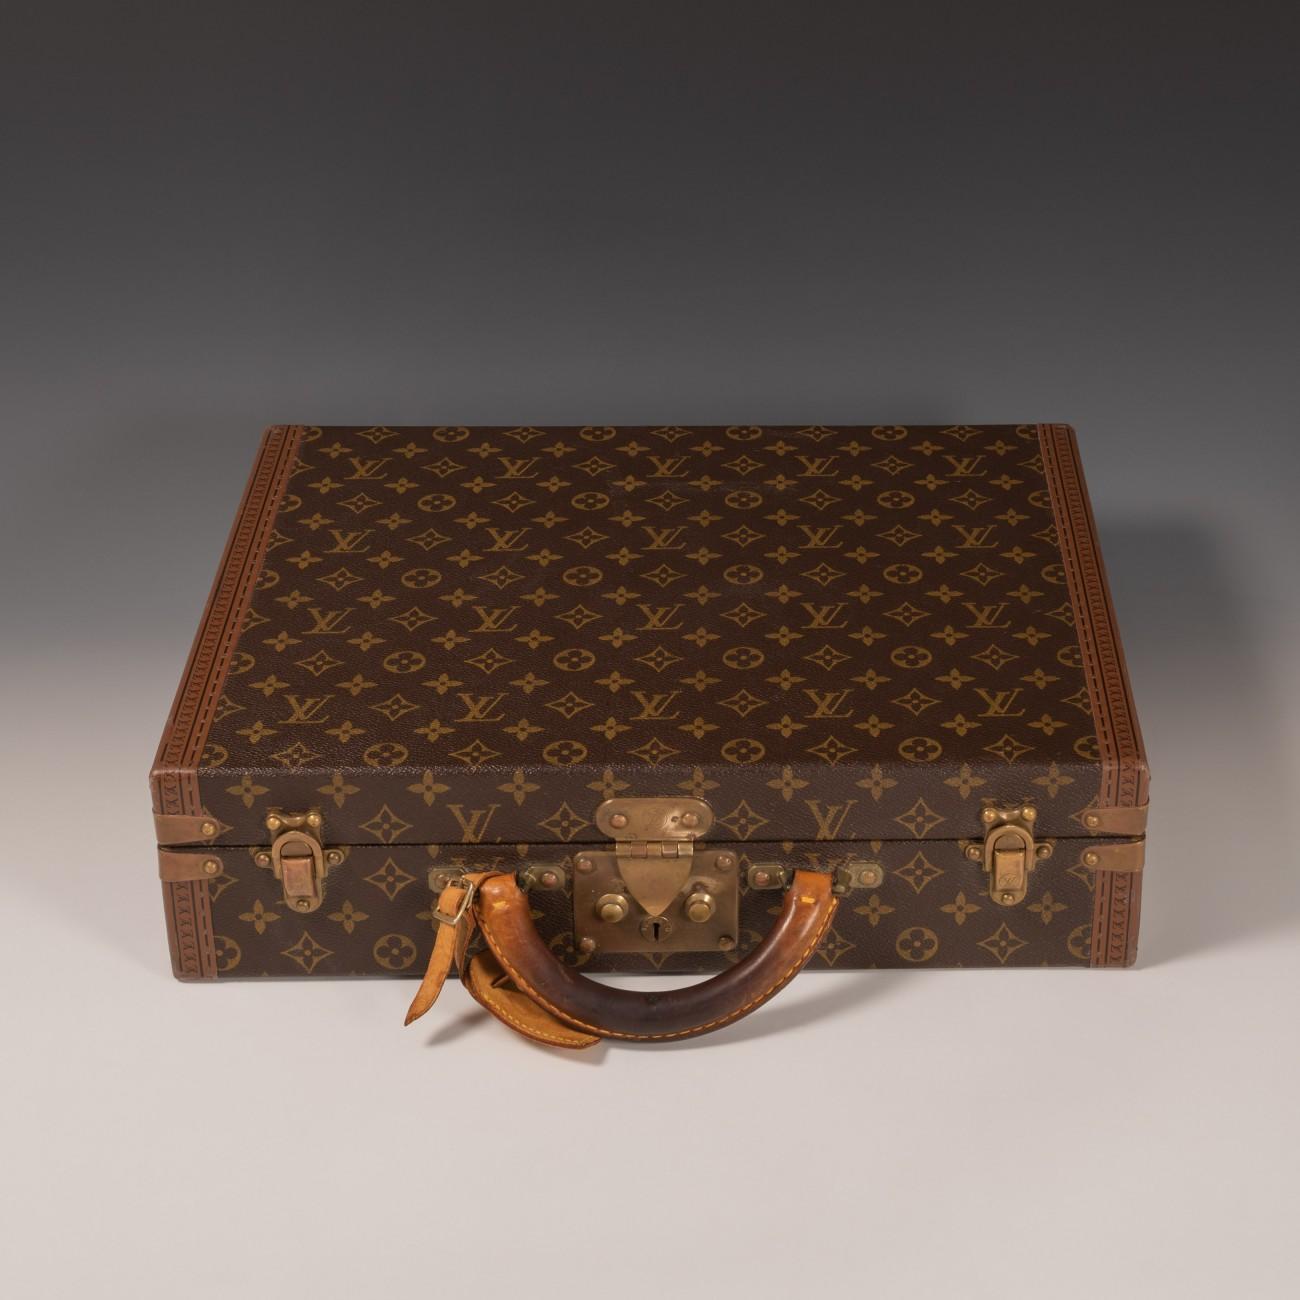 Louis Vuitton 'President' in LV monogram pattern with brass fittings and trimmed with lozine to the edges. The lid of the case is secured by a central sprung catch with lock as well as two latches. Brown leather lining to the interior and the inside